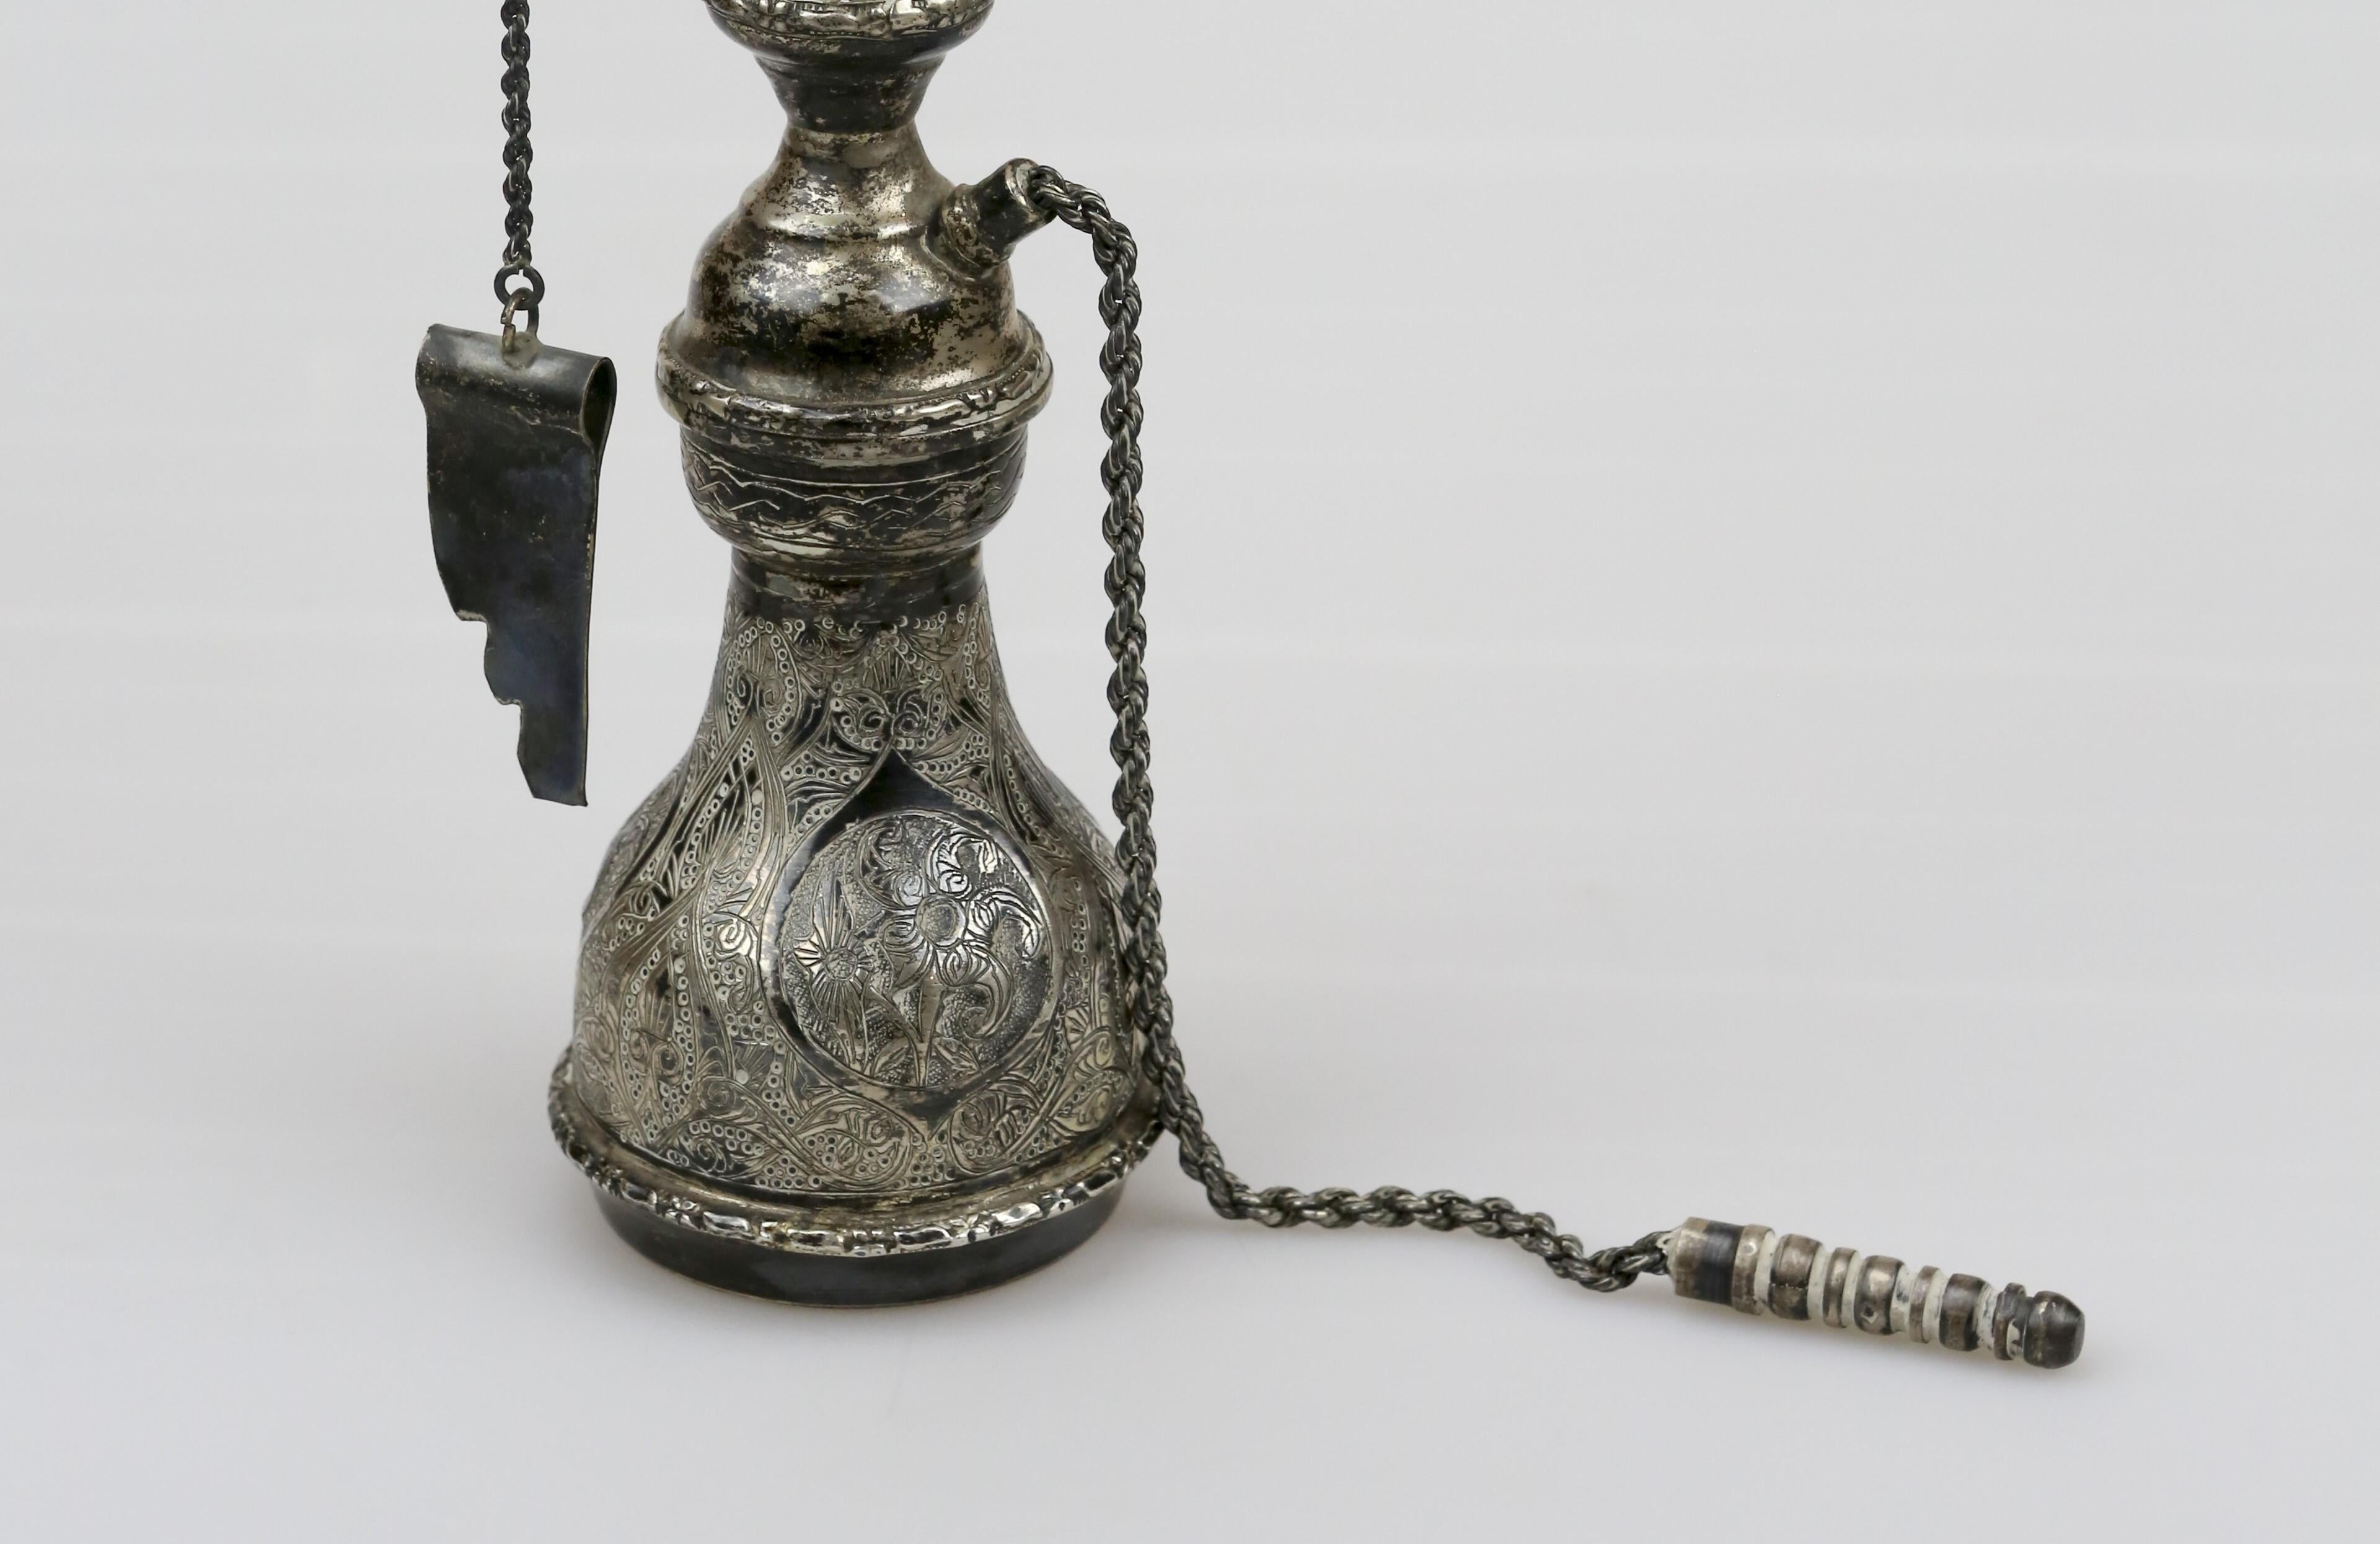 Introducing a truly captivating piece of art, the Persian Silver Miniature Decorative Hookah. This exquisite hookah is a masterpiece crafted by skilled artisans from Iran, renowned for their unparalleled craftsmanship and attention to